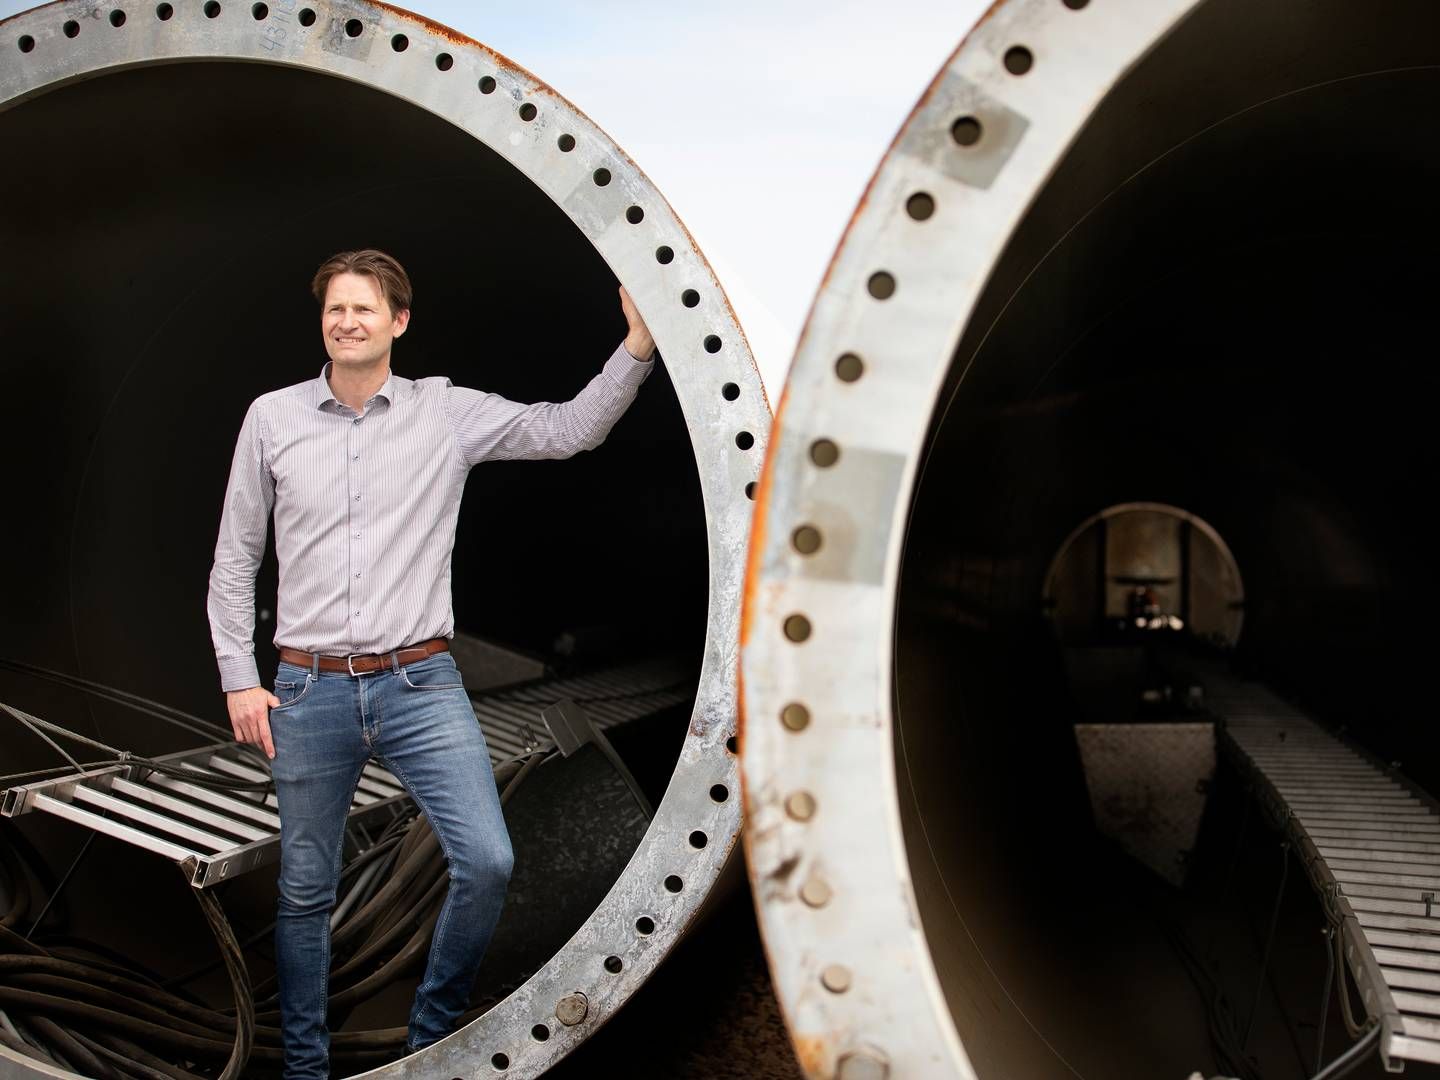 "We want to create a value chain from A to Z in the handling of used turbines," says Michael Kamstrup Søndergaard, CEO of Kingo Karlsen. | Photo: Kingo/PR